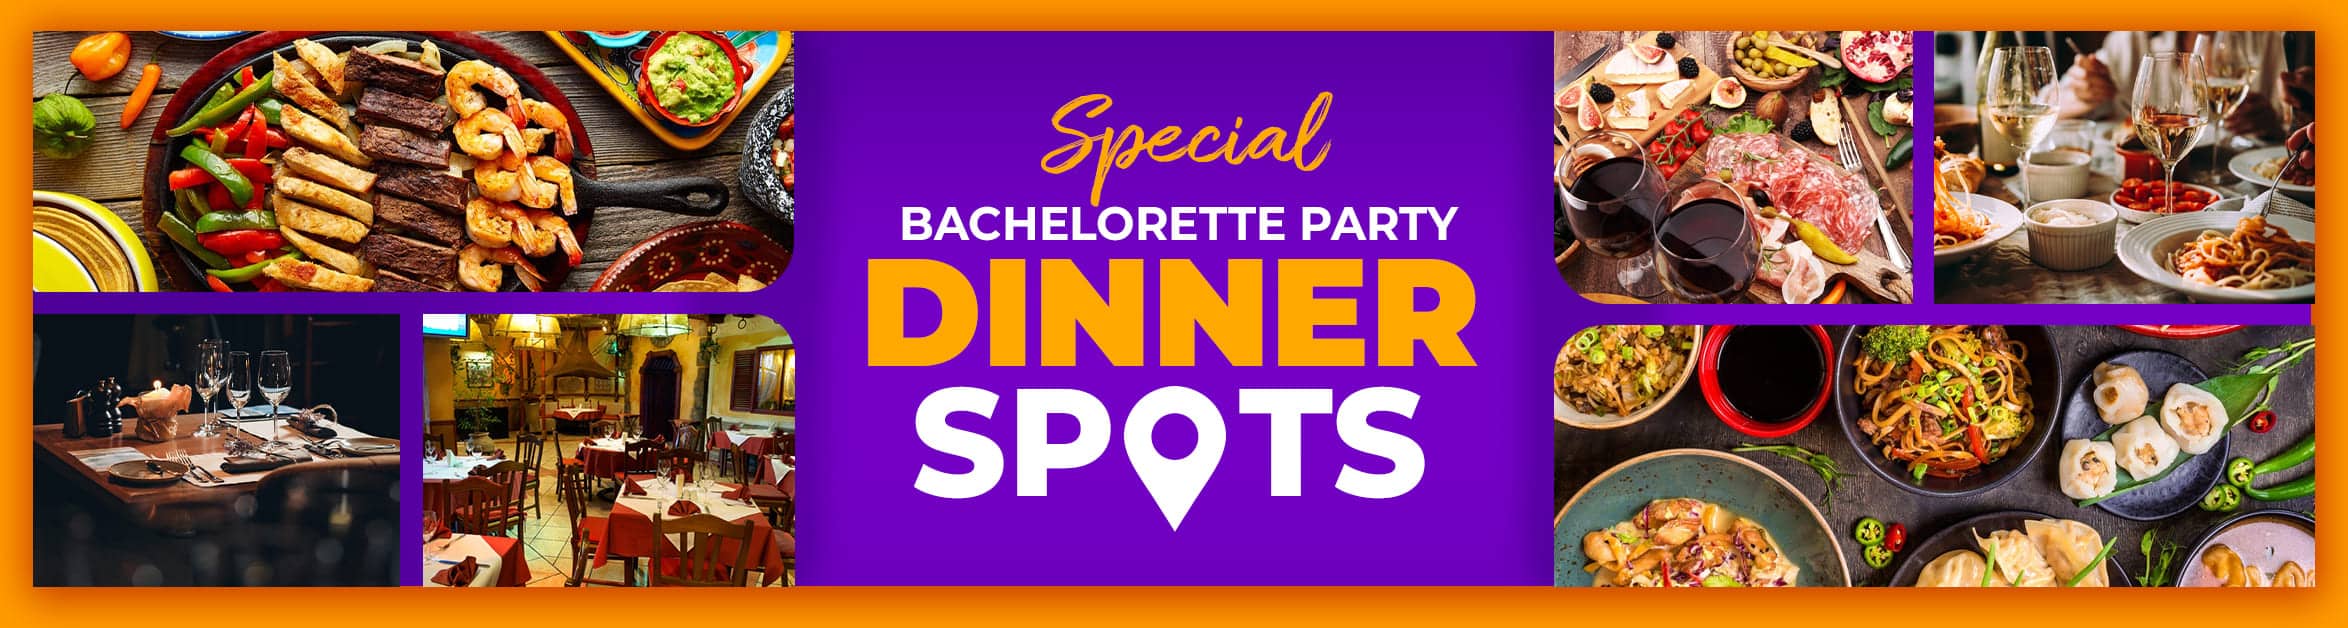 Assorted culinary delights from special dinner spots ideal for a bachelorette party in Las Vegas, featuring elegant dining settings and a variety of dishes.